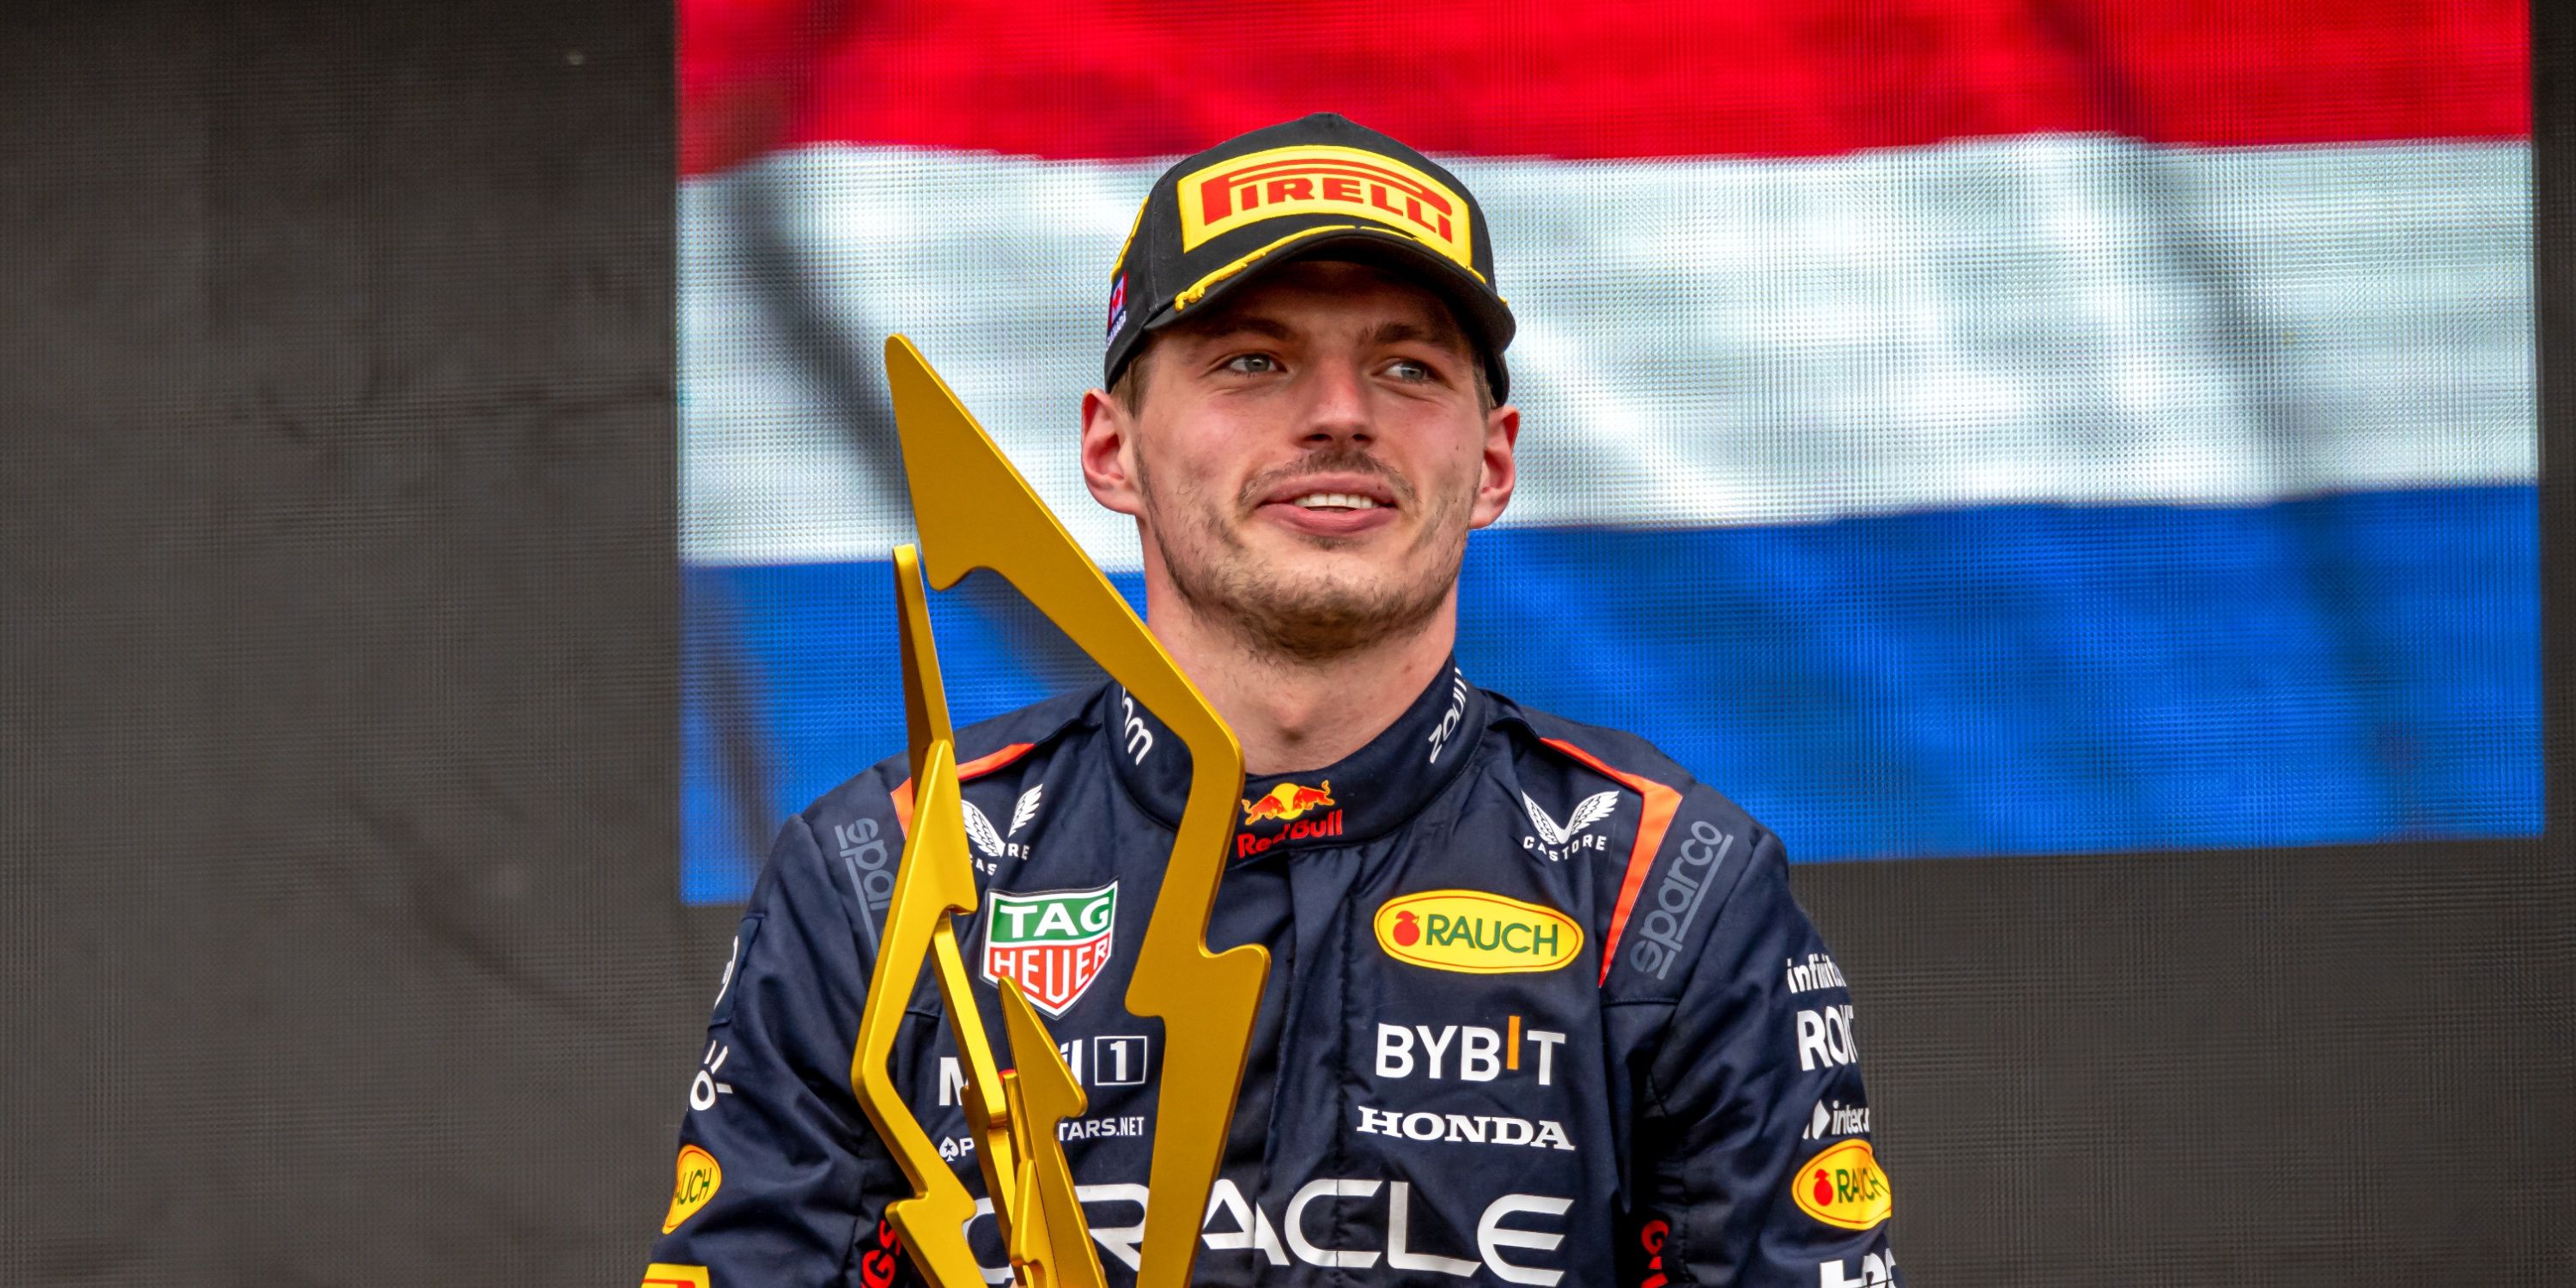 Max Verstappen on the podium at the Canadian Grand Prix